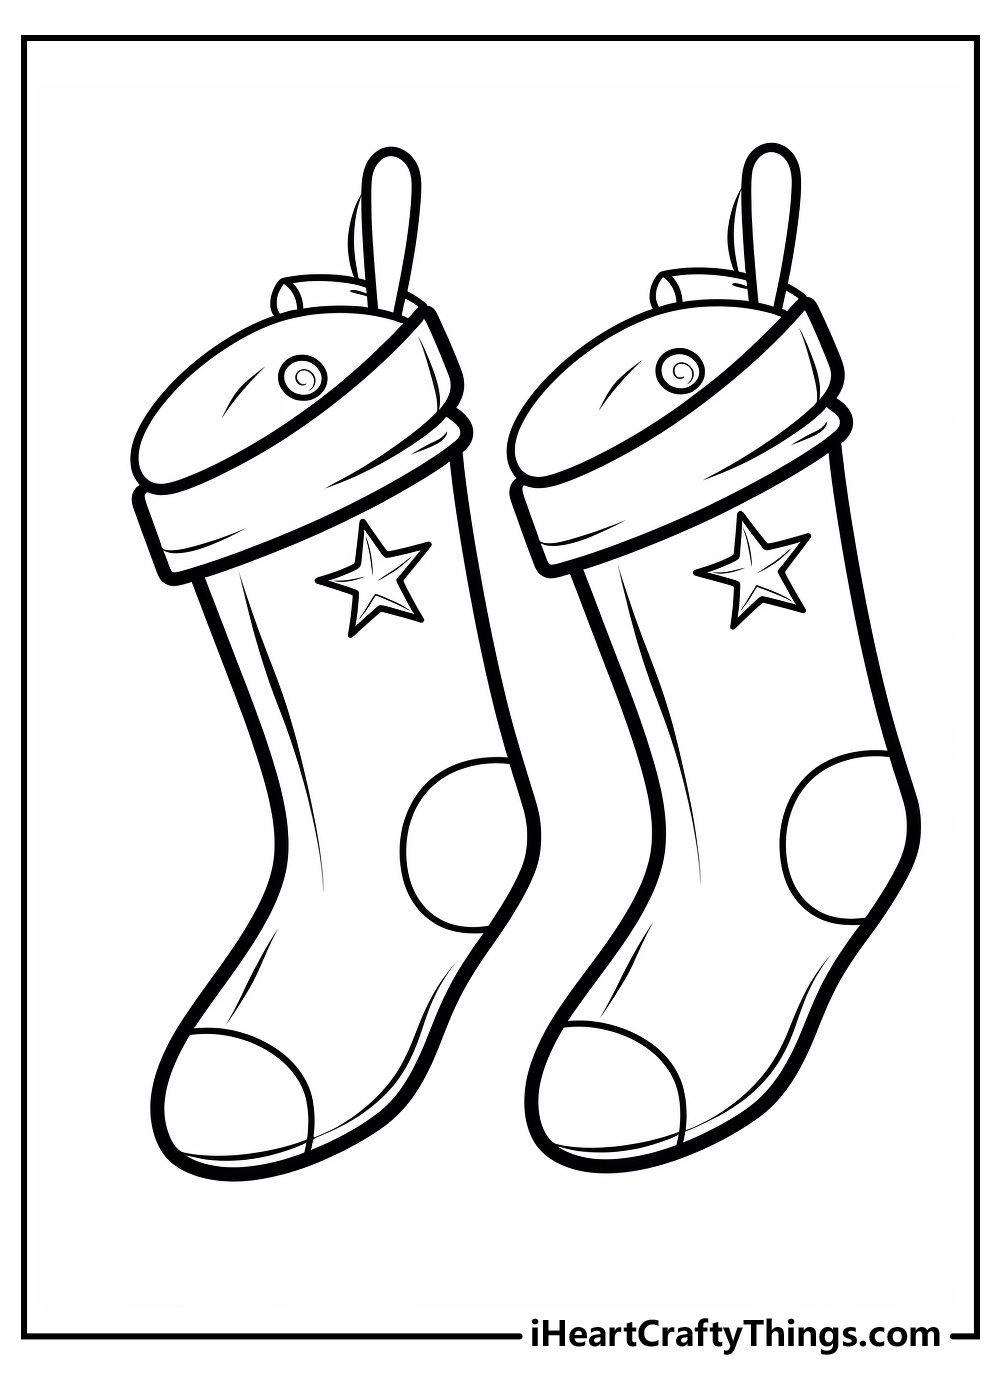 Christmas stocking coloring pages free printables